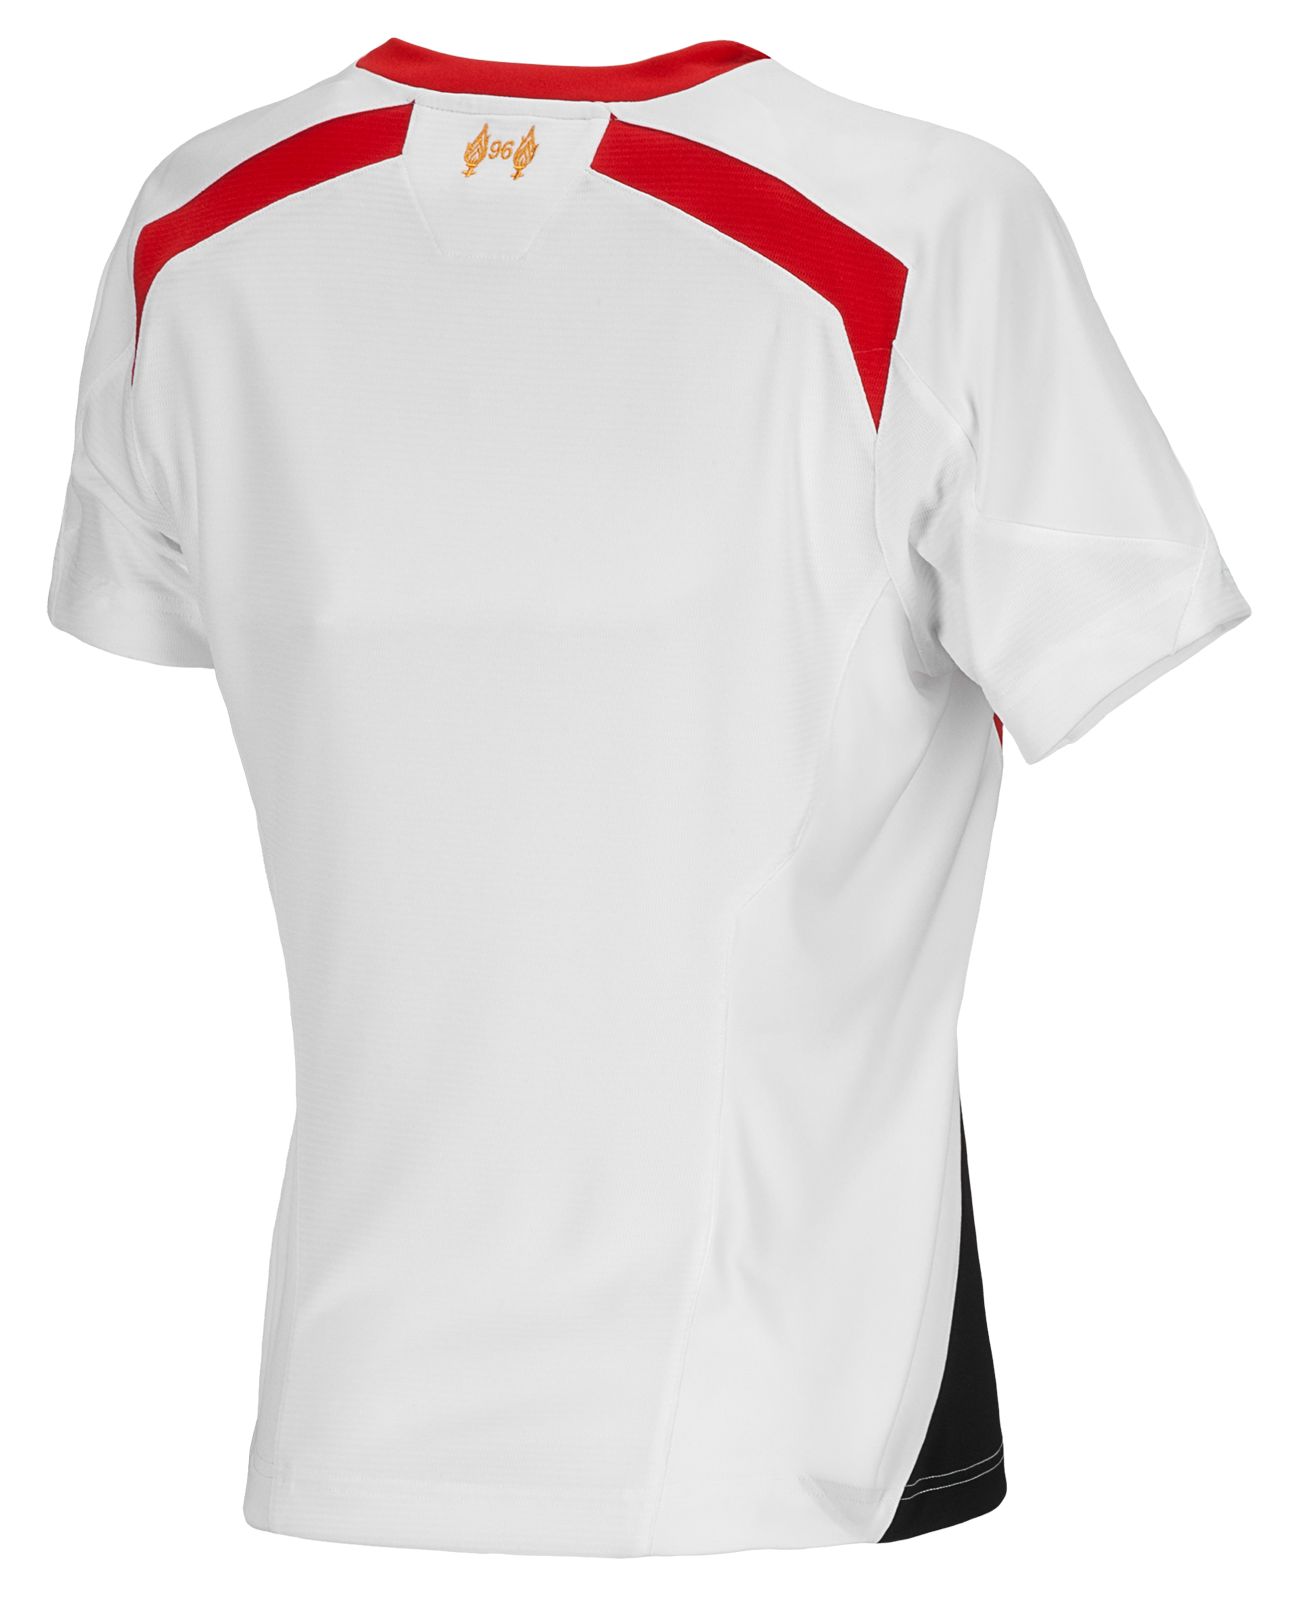 Liverpool Away Ladies Jersey 2013/14, White with Anthracite & High Risk Red image number 0